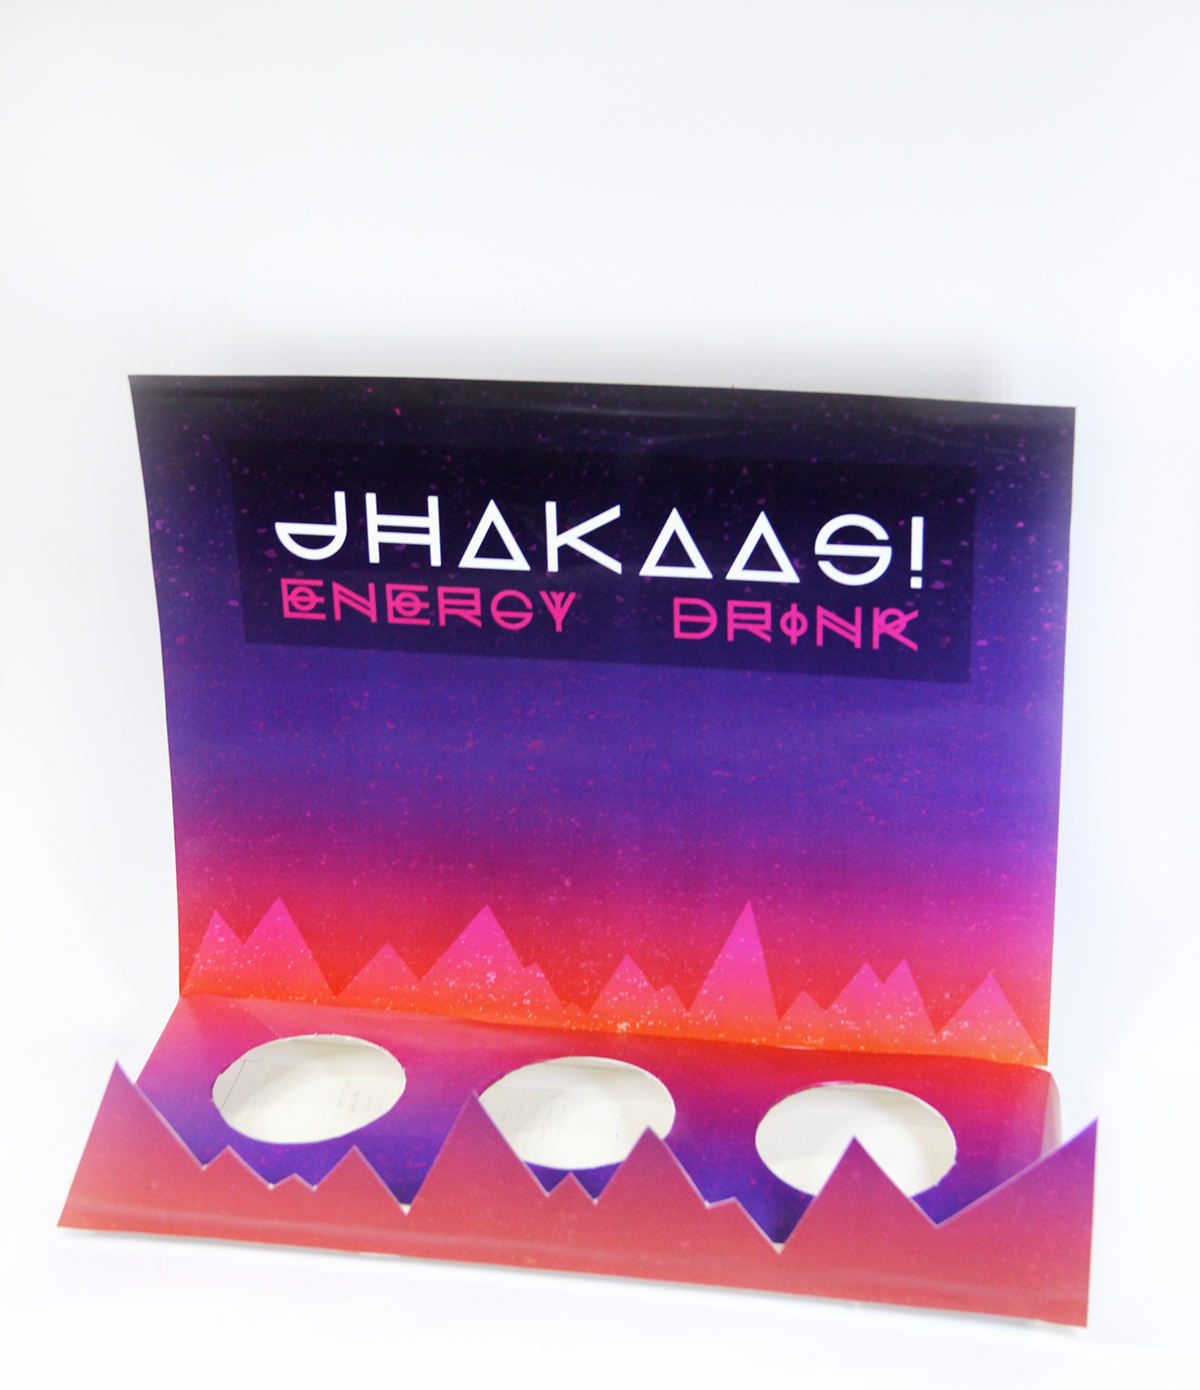 energy drink brand identity drink can puja khurana mountains relax shelf display bangalore graphics Visual Communication